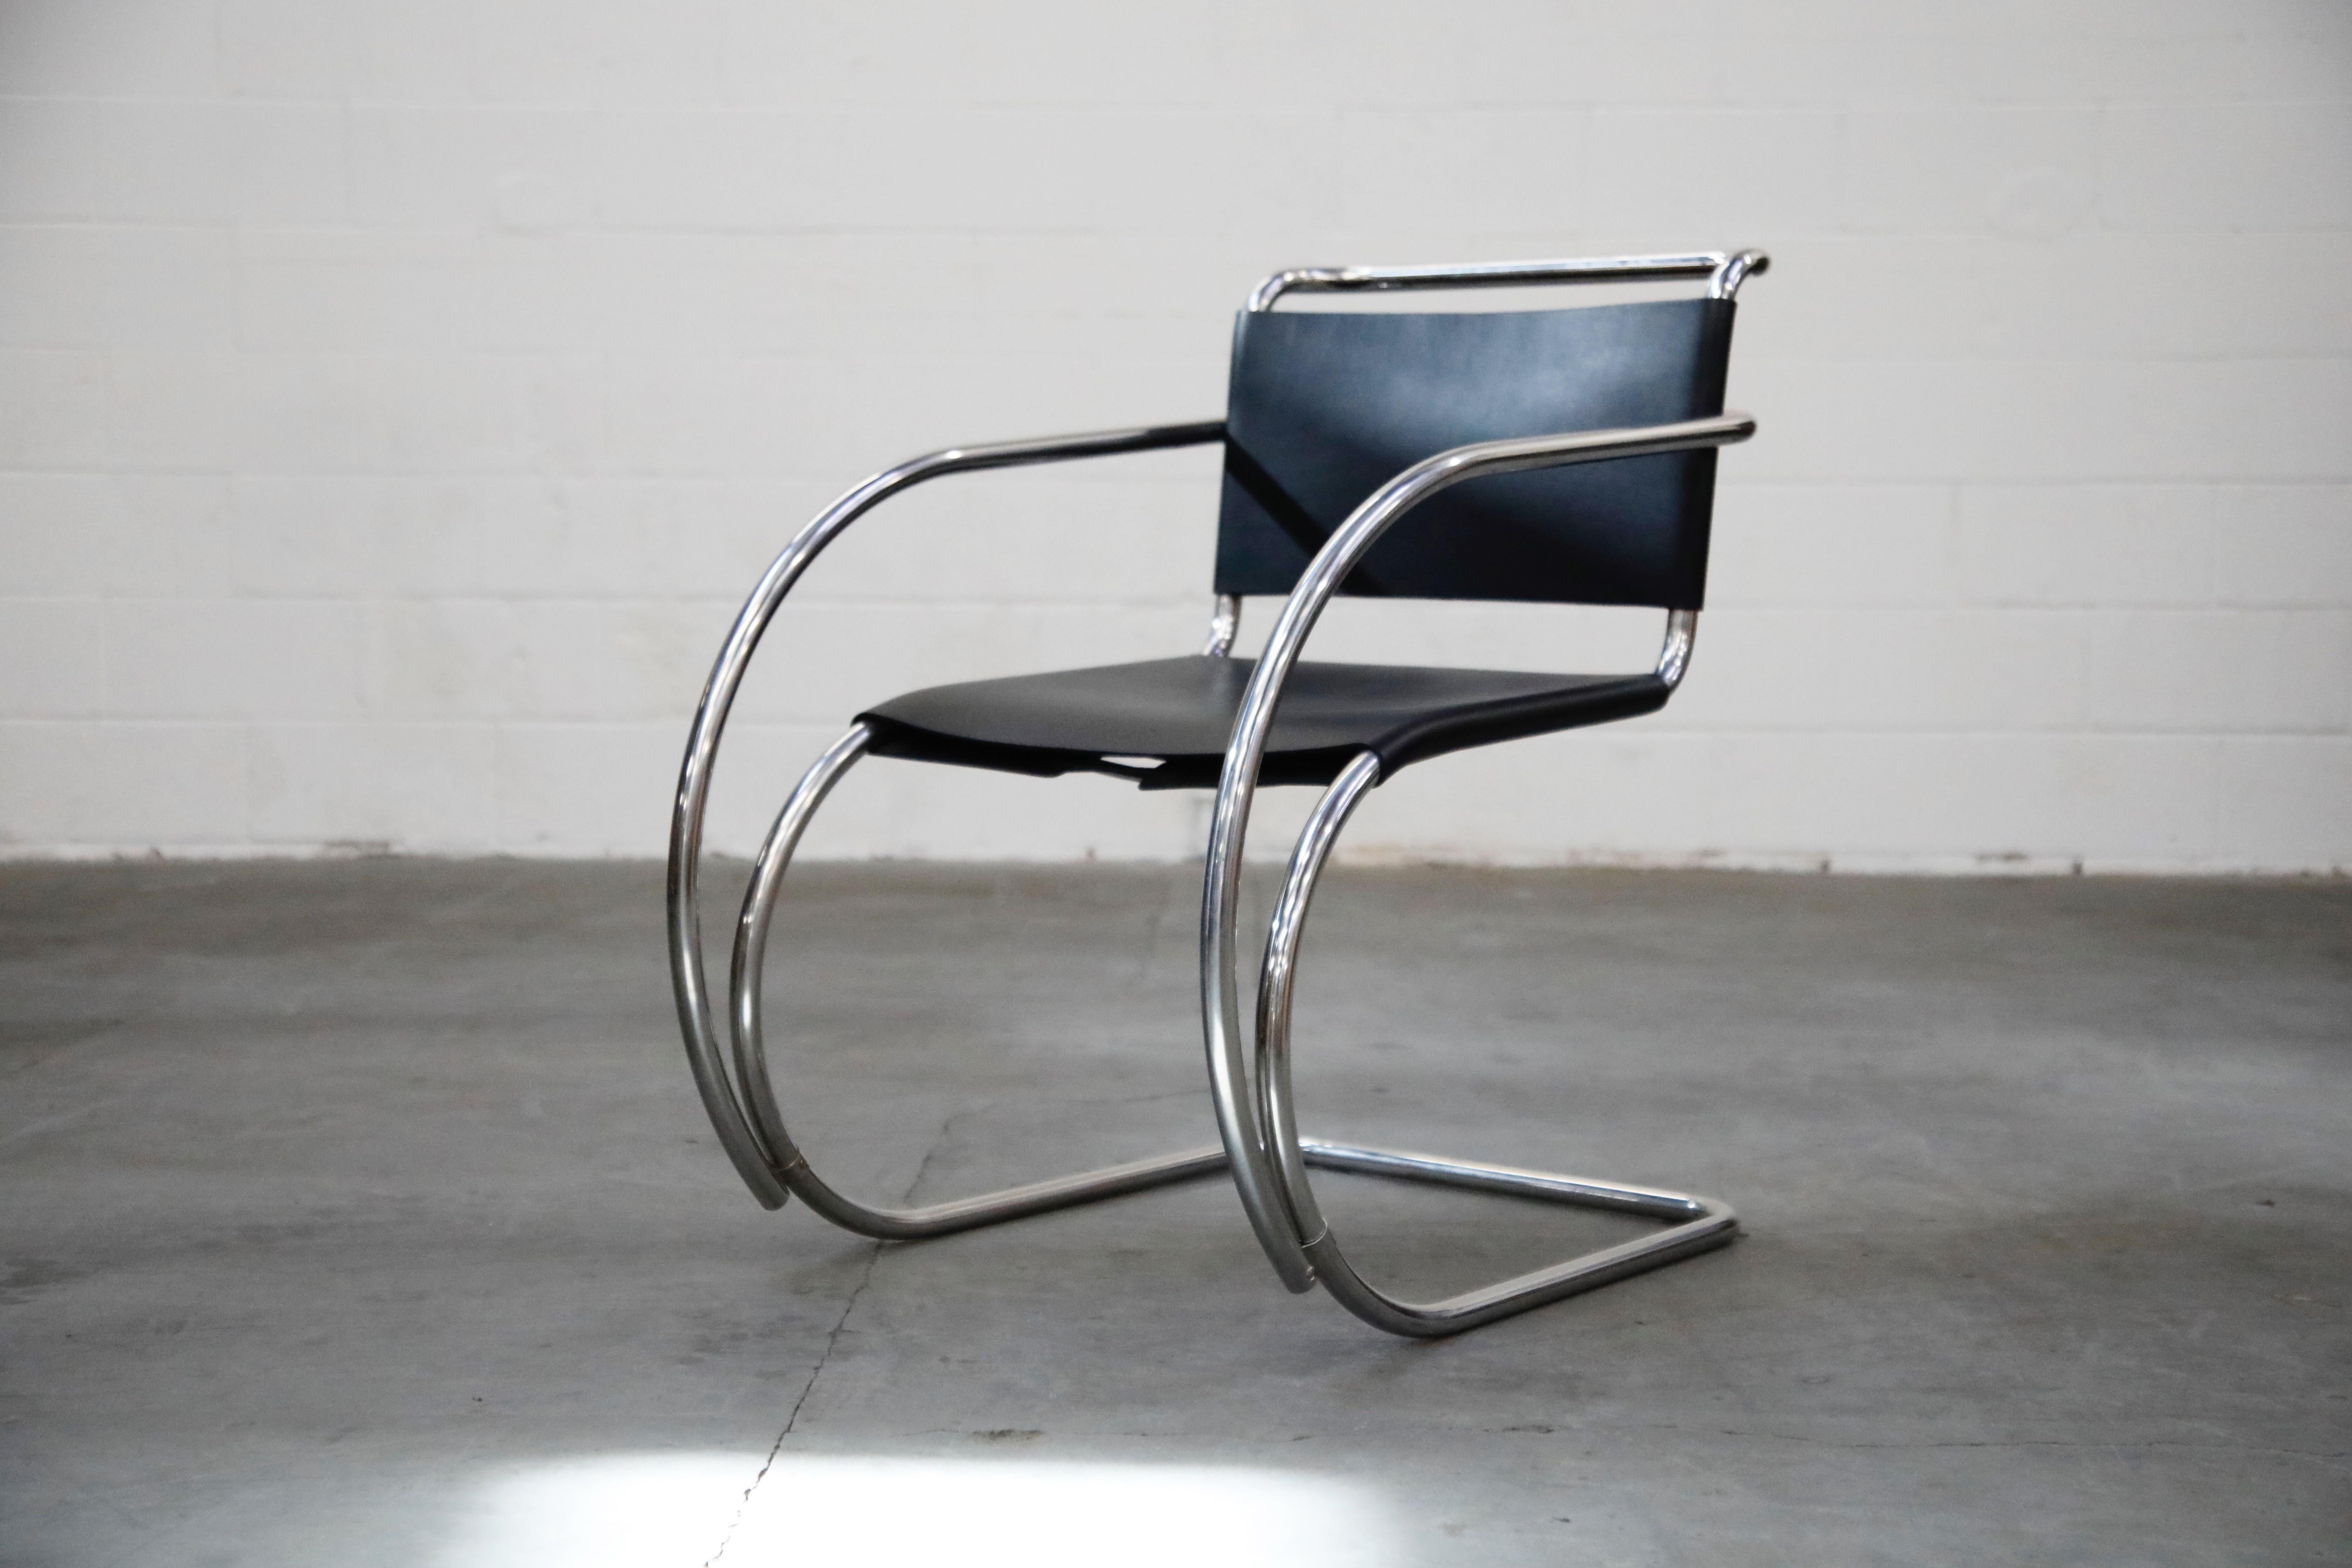 An incredible set of four (4) signed cantilevered MR 20 armchairs by Ludwig Mies van der Rohe for Knoll. In excellent showroom condition, this collectible set of arm chairs possess their original Knoll made in Italy labels. The black saddle leather